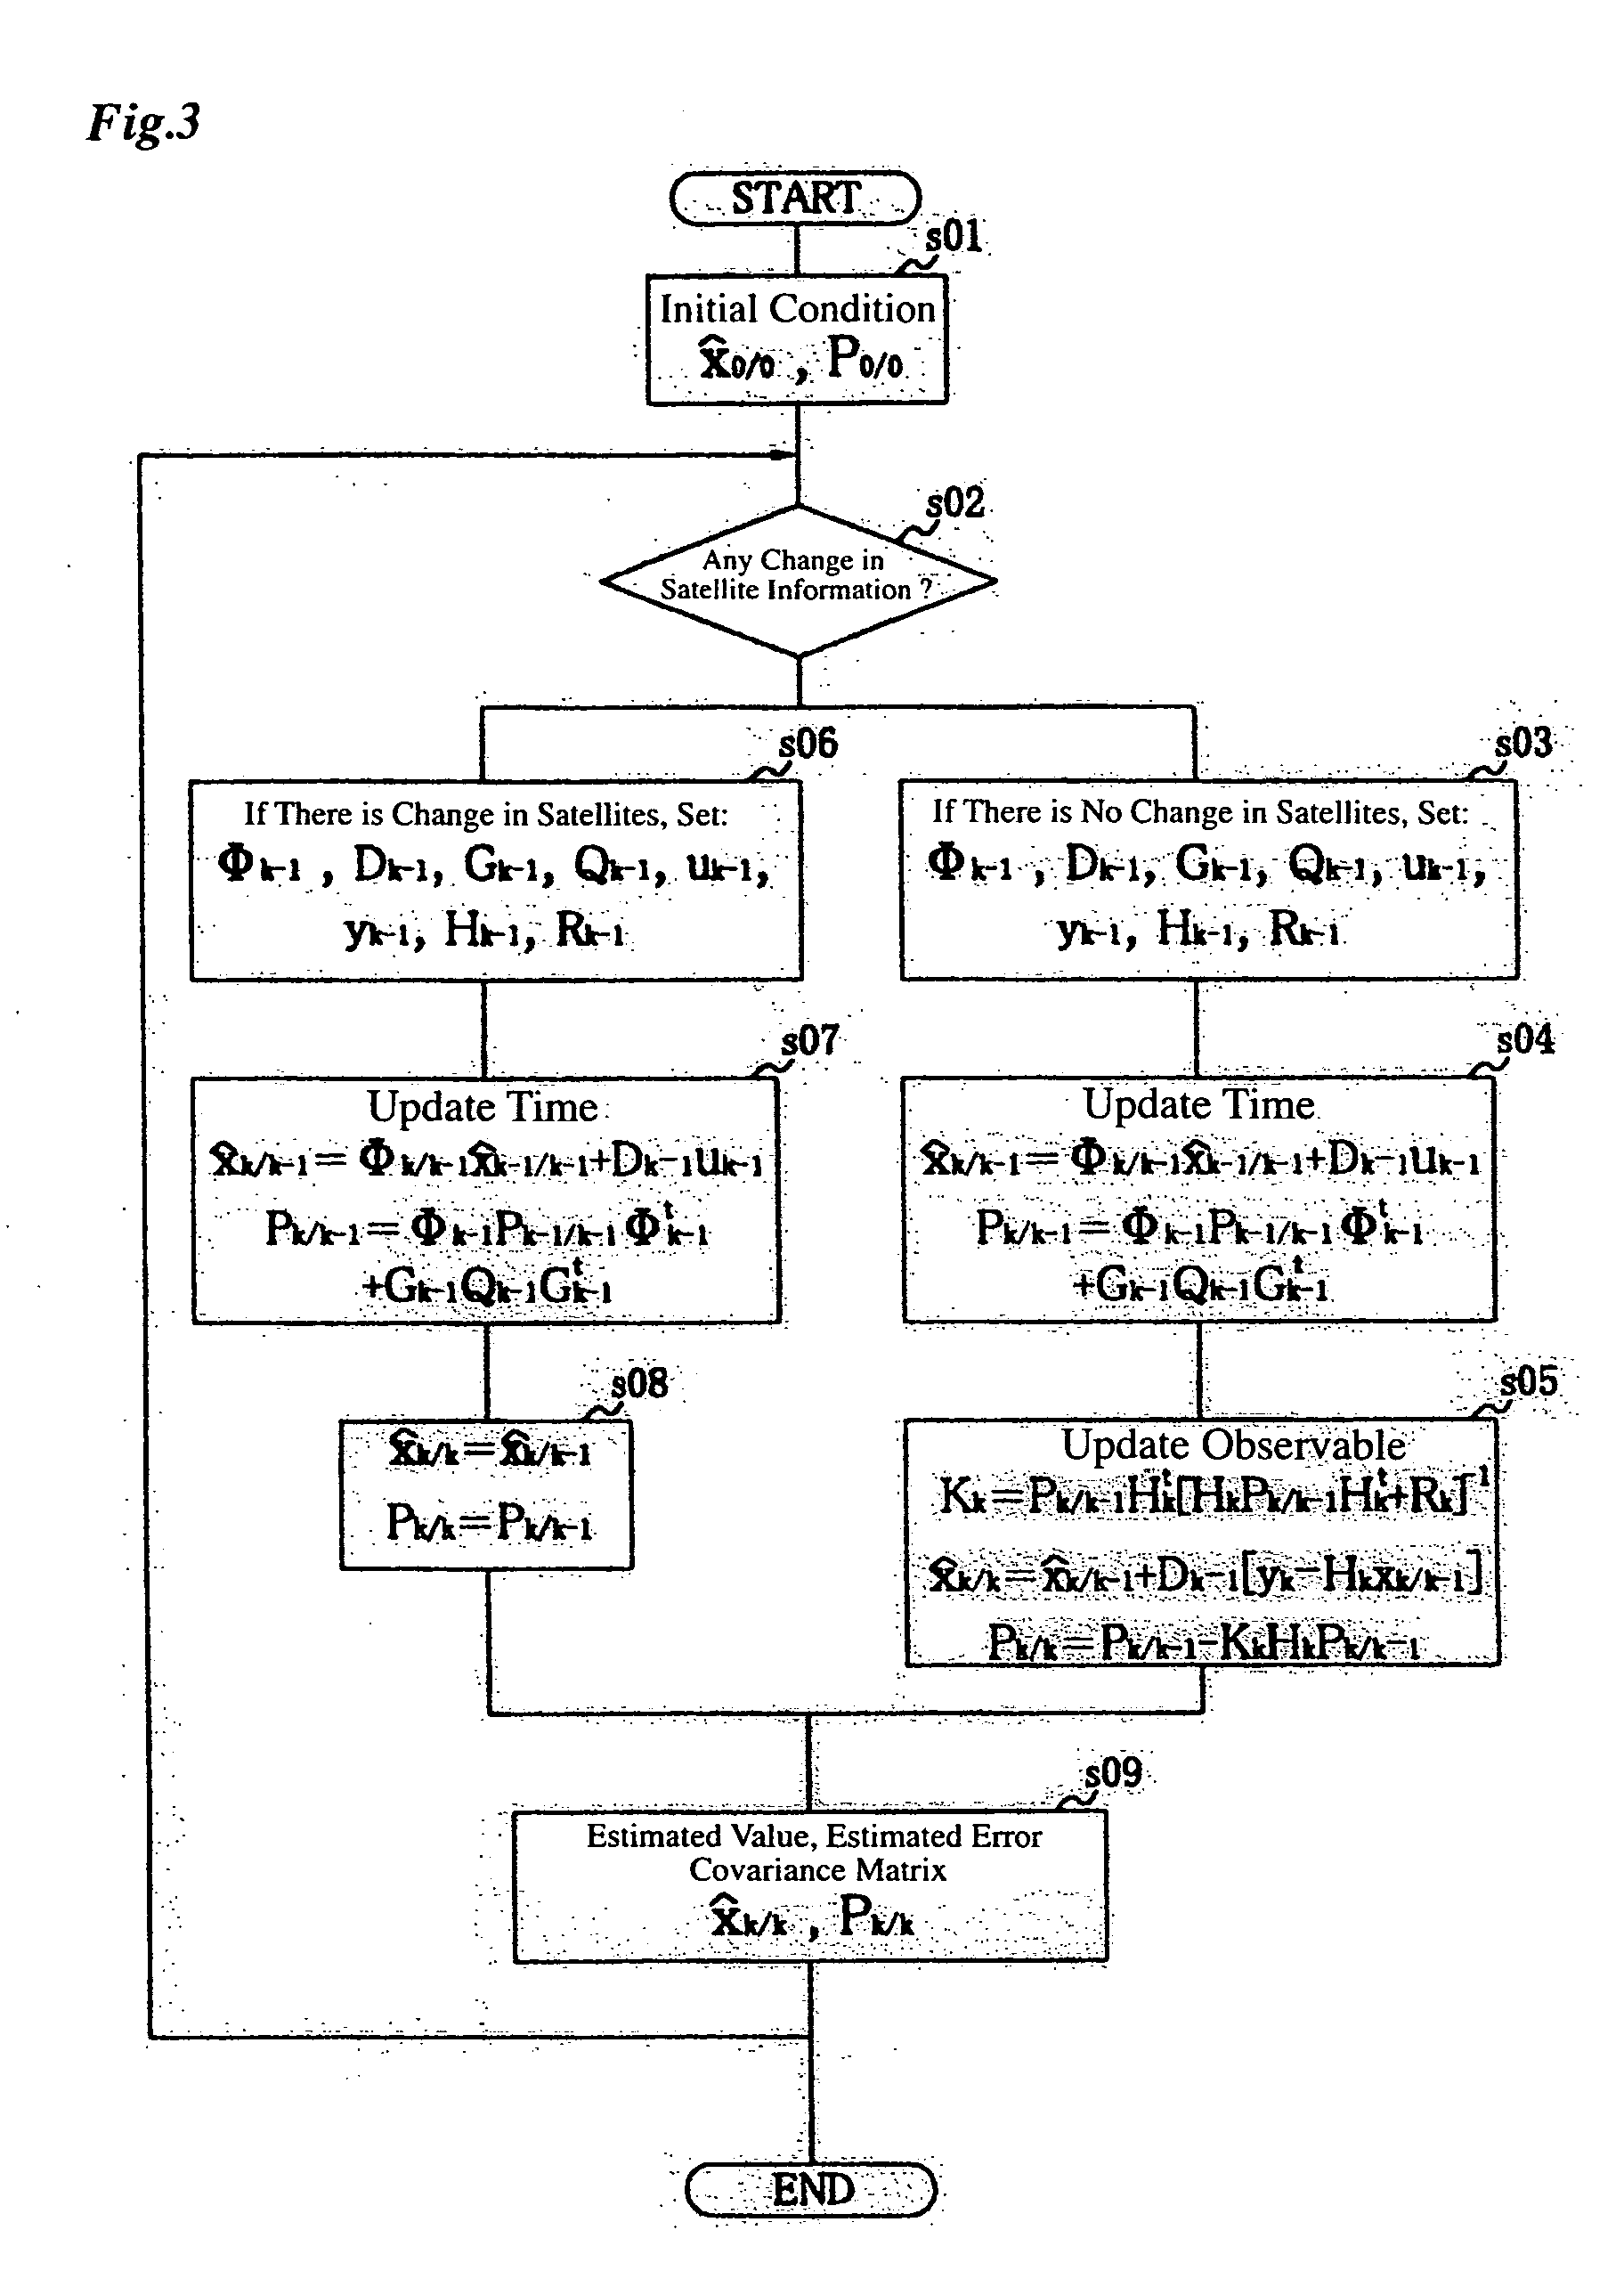 Carrier-phase-based relative positioning device